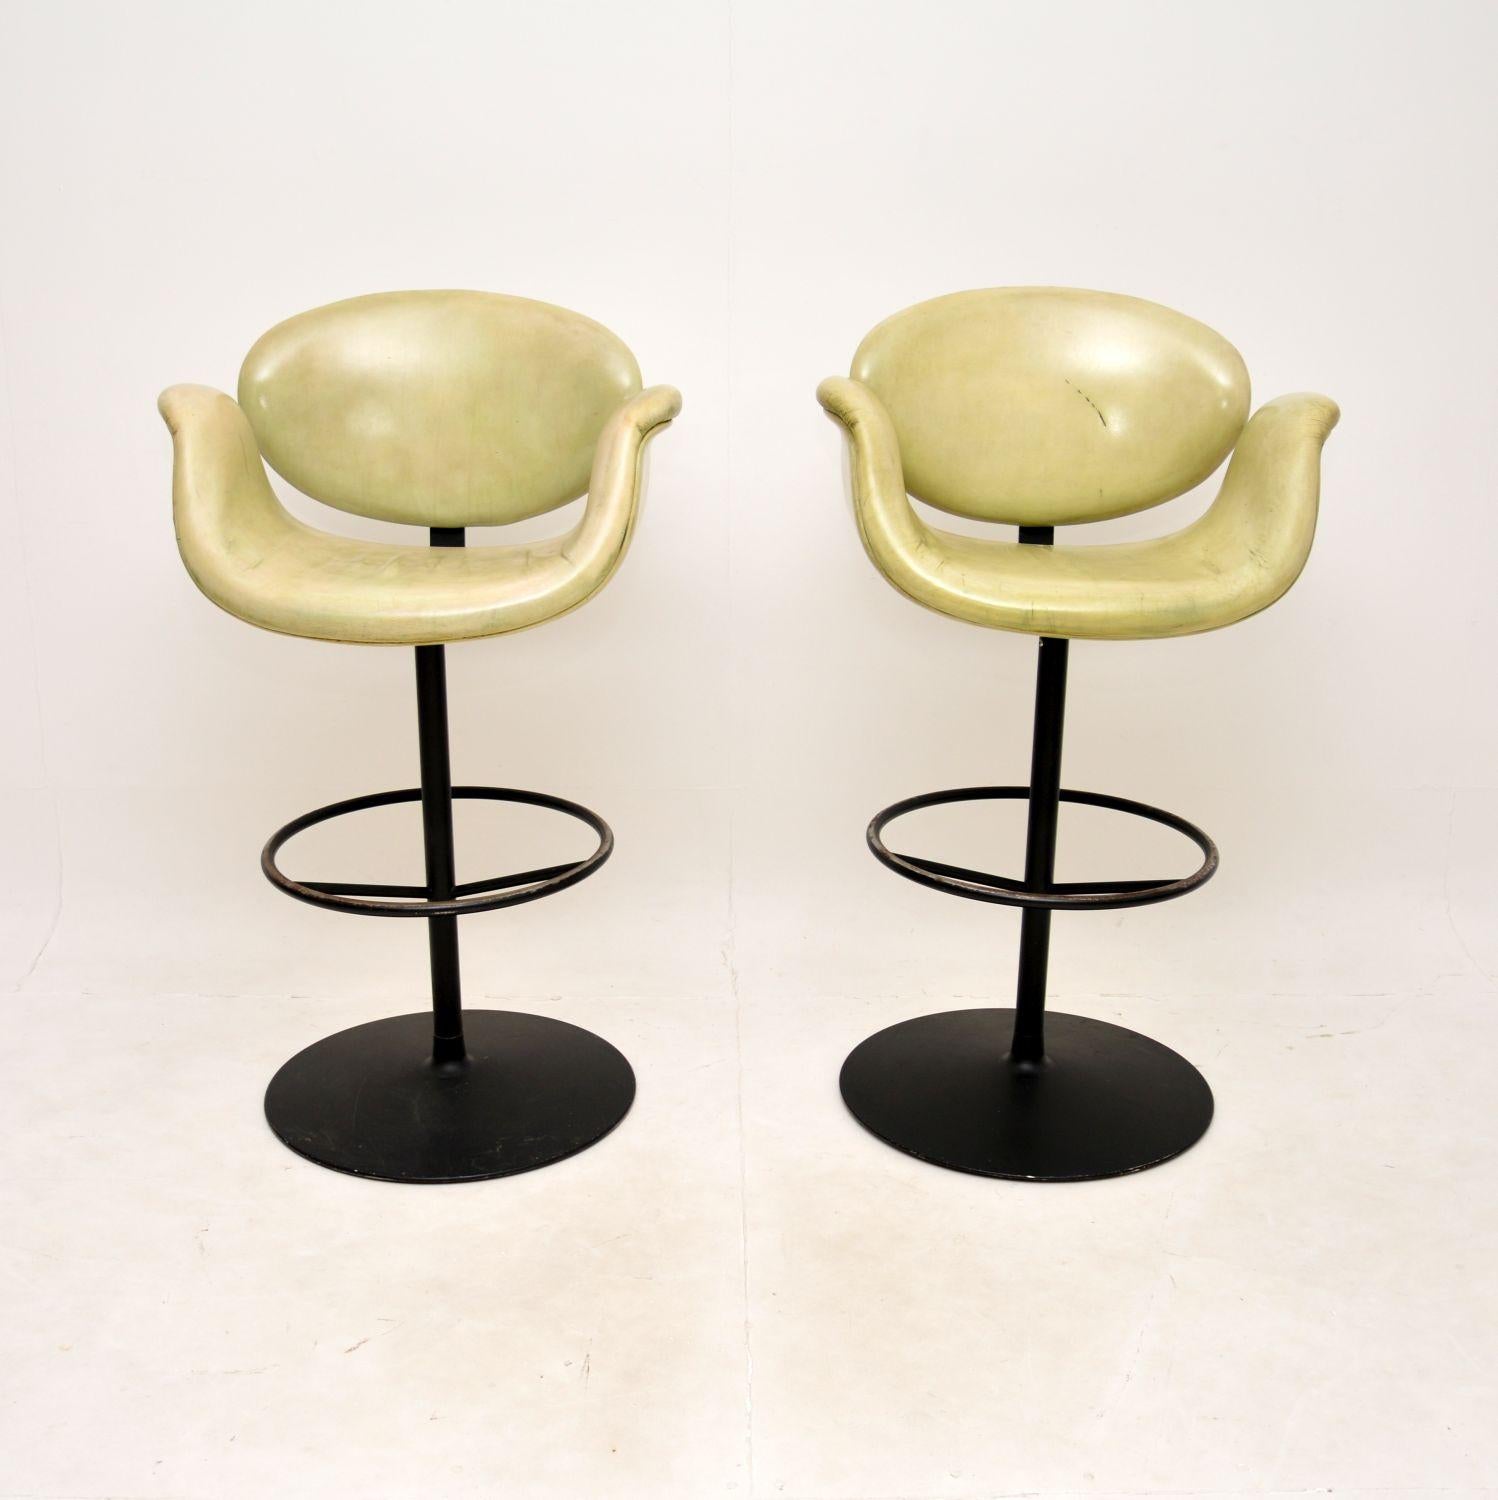 A magnificent pair of vintage leather tulip bar stools by Pierre Paulin. They were originally designed in 1965, this set were made in the Netherlands by Artifort, they date from around the 1970-80’s.

The quality is exceptional, they are beautifully